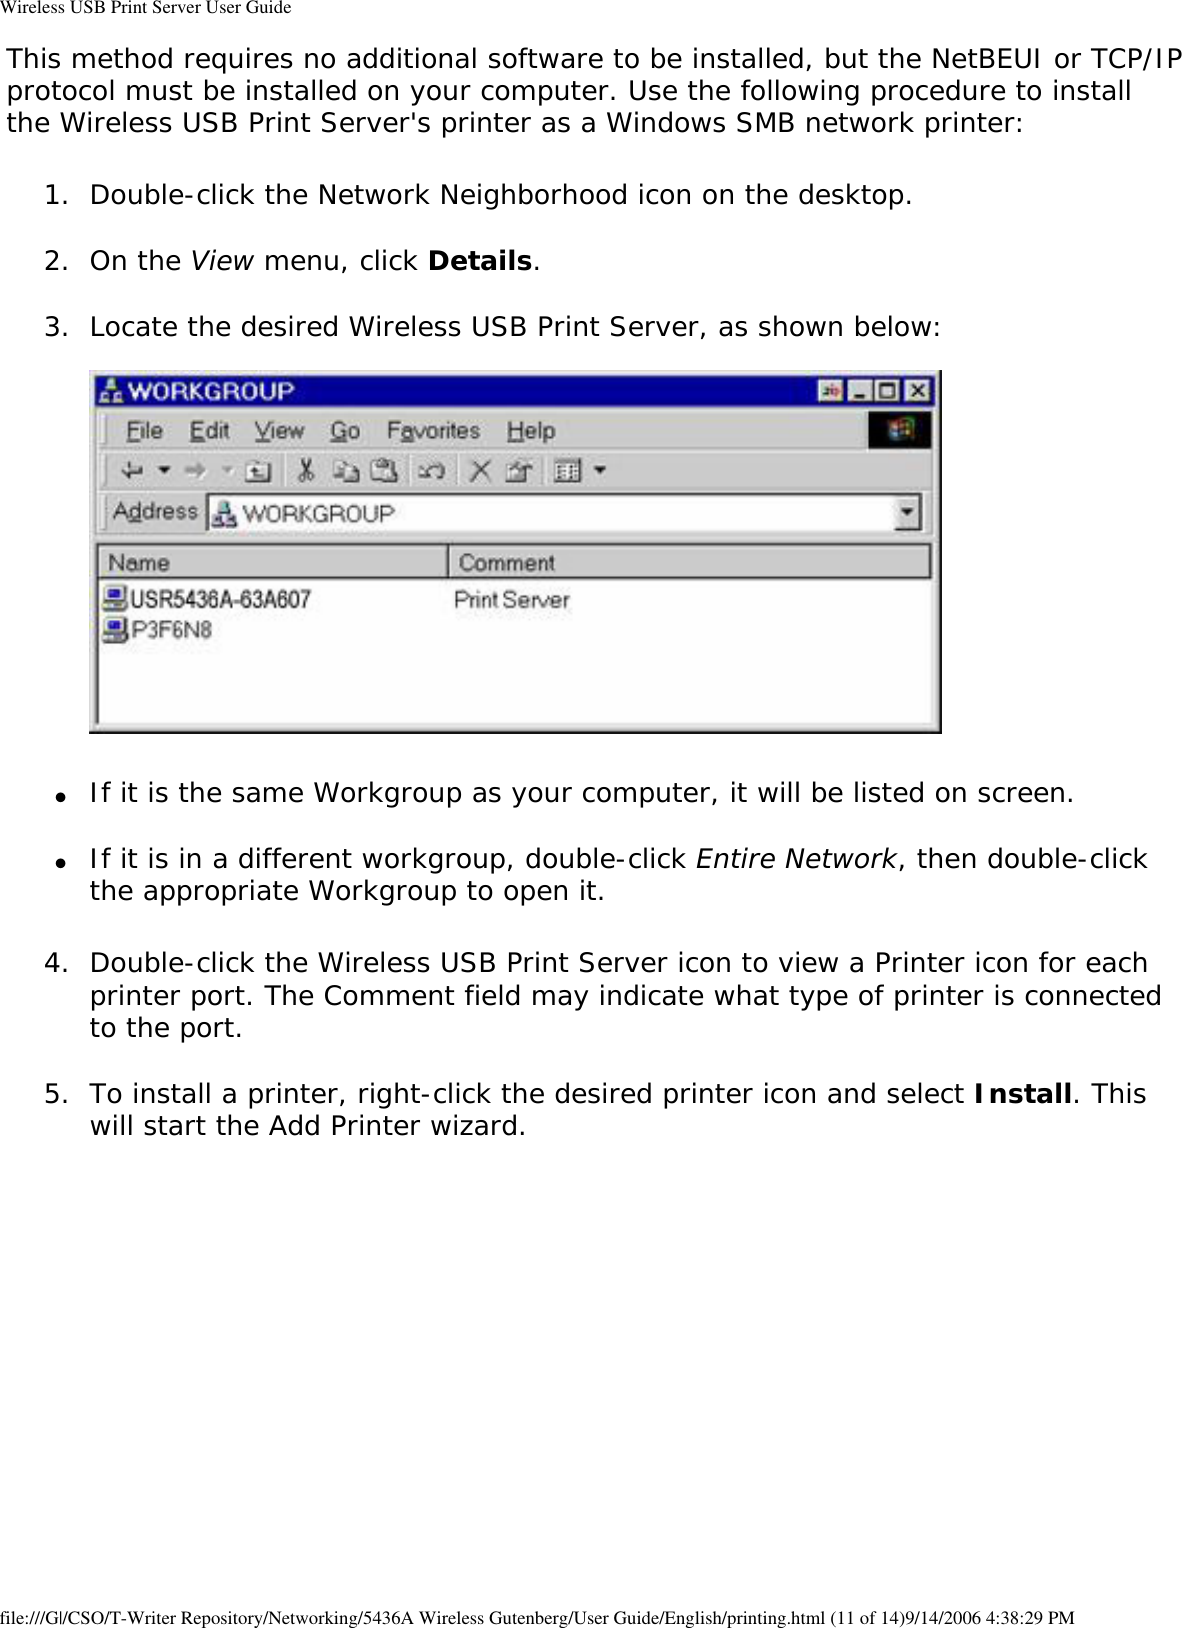 Wireless USB Print Server User GuideThis method requires no additional software to be installed, but the NetBEUI or TCP/IP protocol must be installed on your computer. Use the following procedure to install the Wireless USB Print Server&apos;s printer as a Windows SMB network printer:1.  Double-click the Network Neighborhood icon on the desktop. 2.  On the View menu, click Details. 3.  Locate the desired Wireless USB Print Server, as shown below:    ●     If it is the same Workgroup as your computer, it will be listed on screen. ●     If it is in a different workgroup, double-click Entire Network, then double-click the appropriate Workgroup to open it. 4.  Double-click the Wireless USB Print Server icon to view a Printer icon for each printer port. The Comment field may indicate what type of printer is connected to the port. 5.  To install a printer, right-click the desired printer icon and select Install. This will start the Add Printer wizard.   file:///G|/CSO/T-Writer Repository/Networking/5436A Wireless Gutenberg/User Guide/English/printing.html (11 of 14)9/14/2006 4:38:29 PM